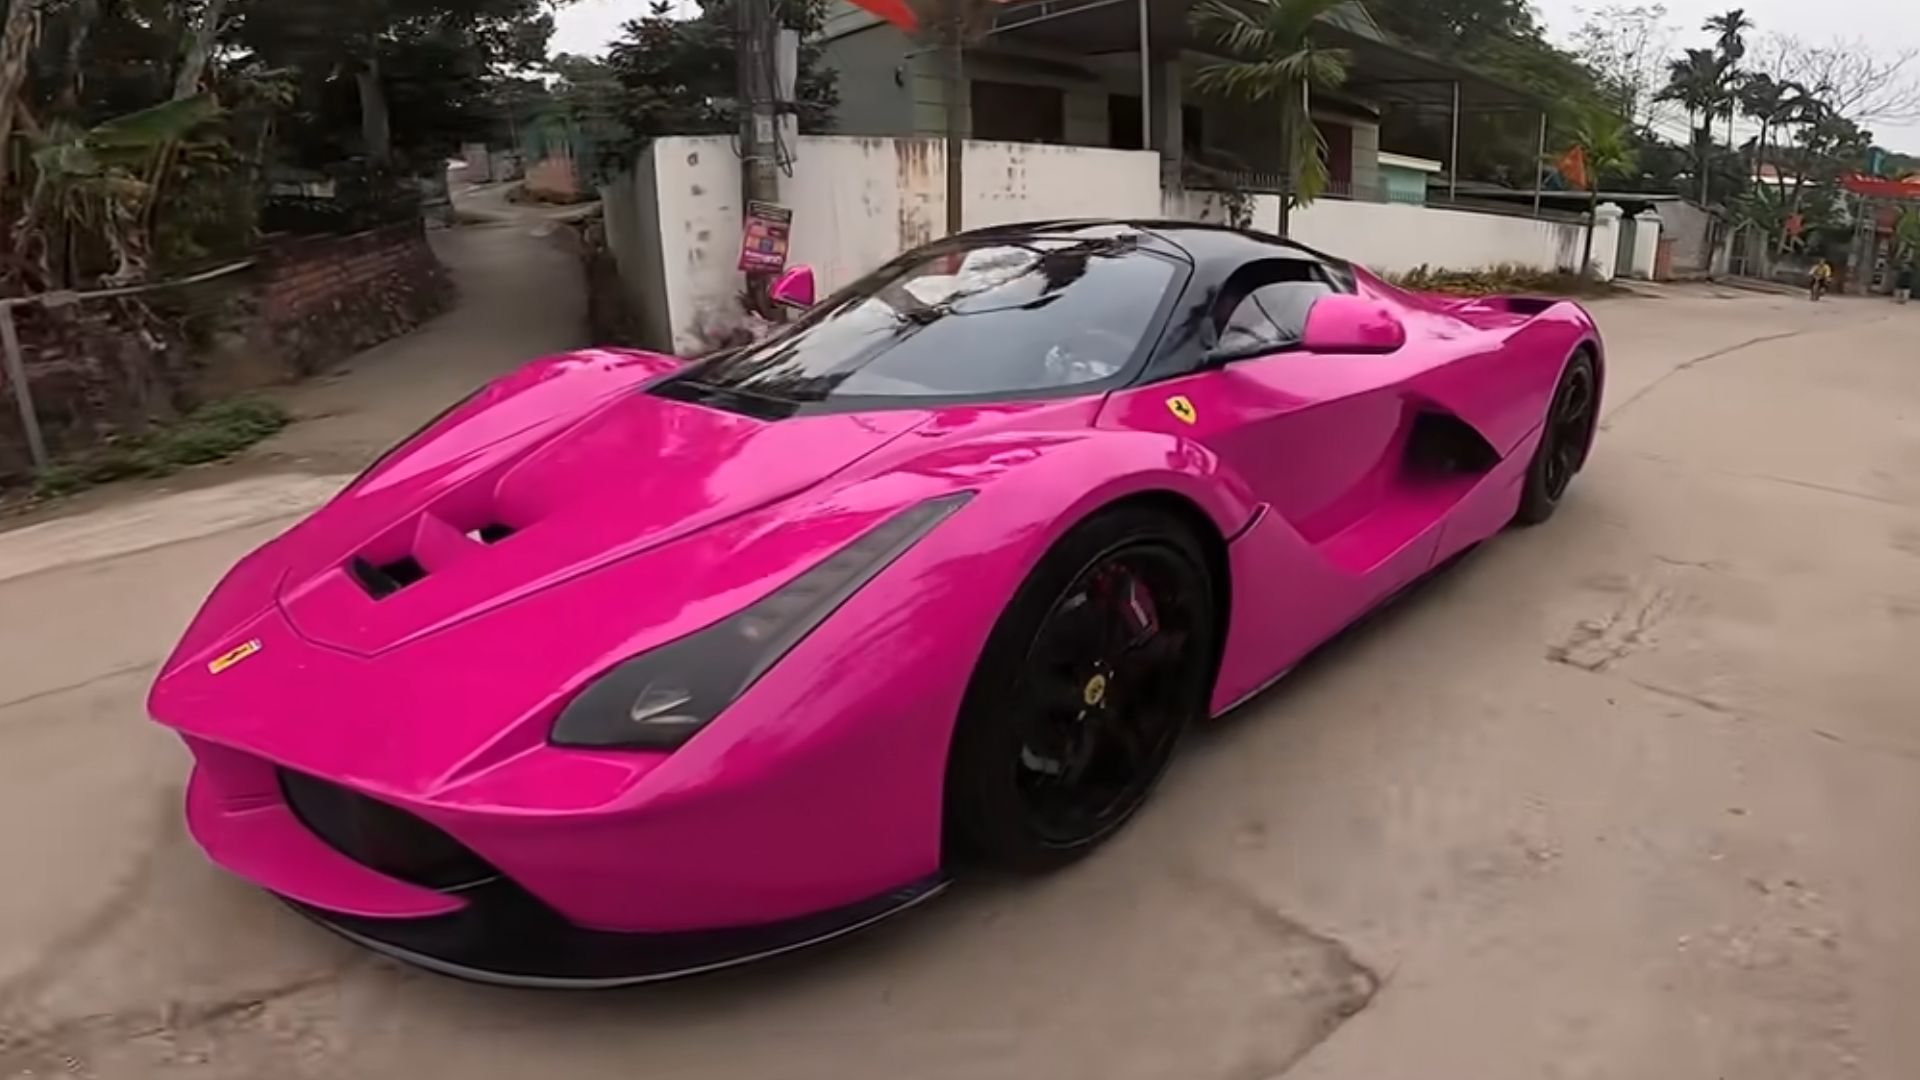 This LaFerrari Is Really An Old Toyota